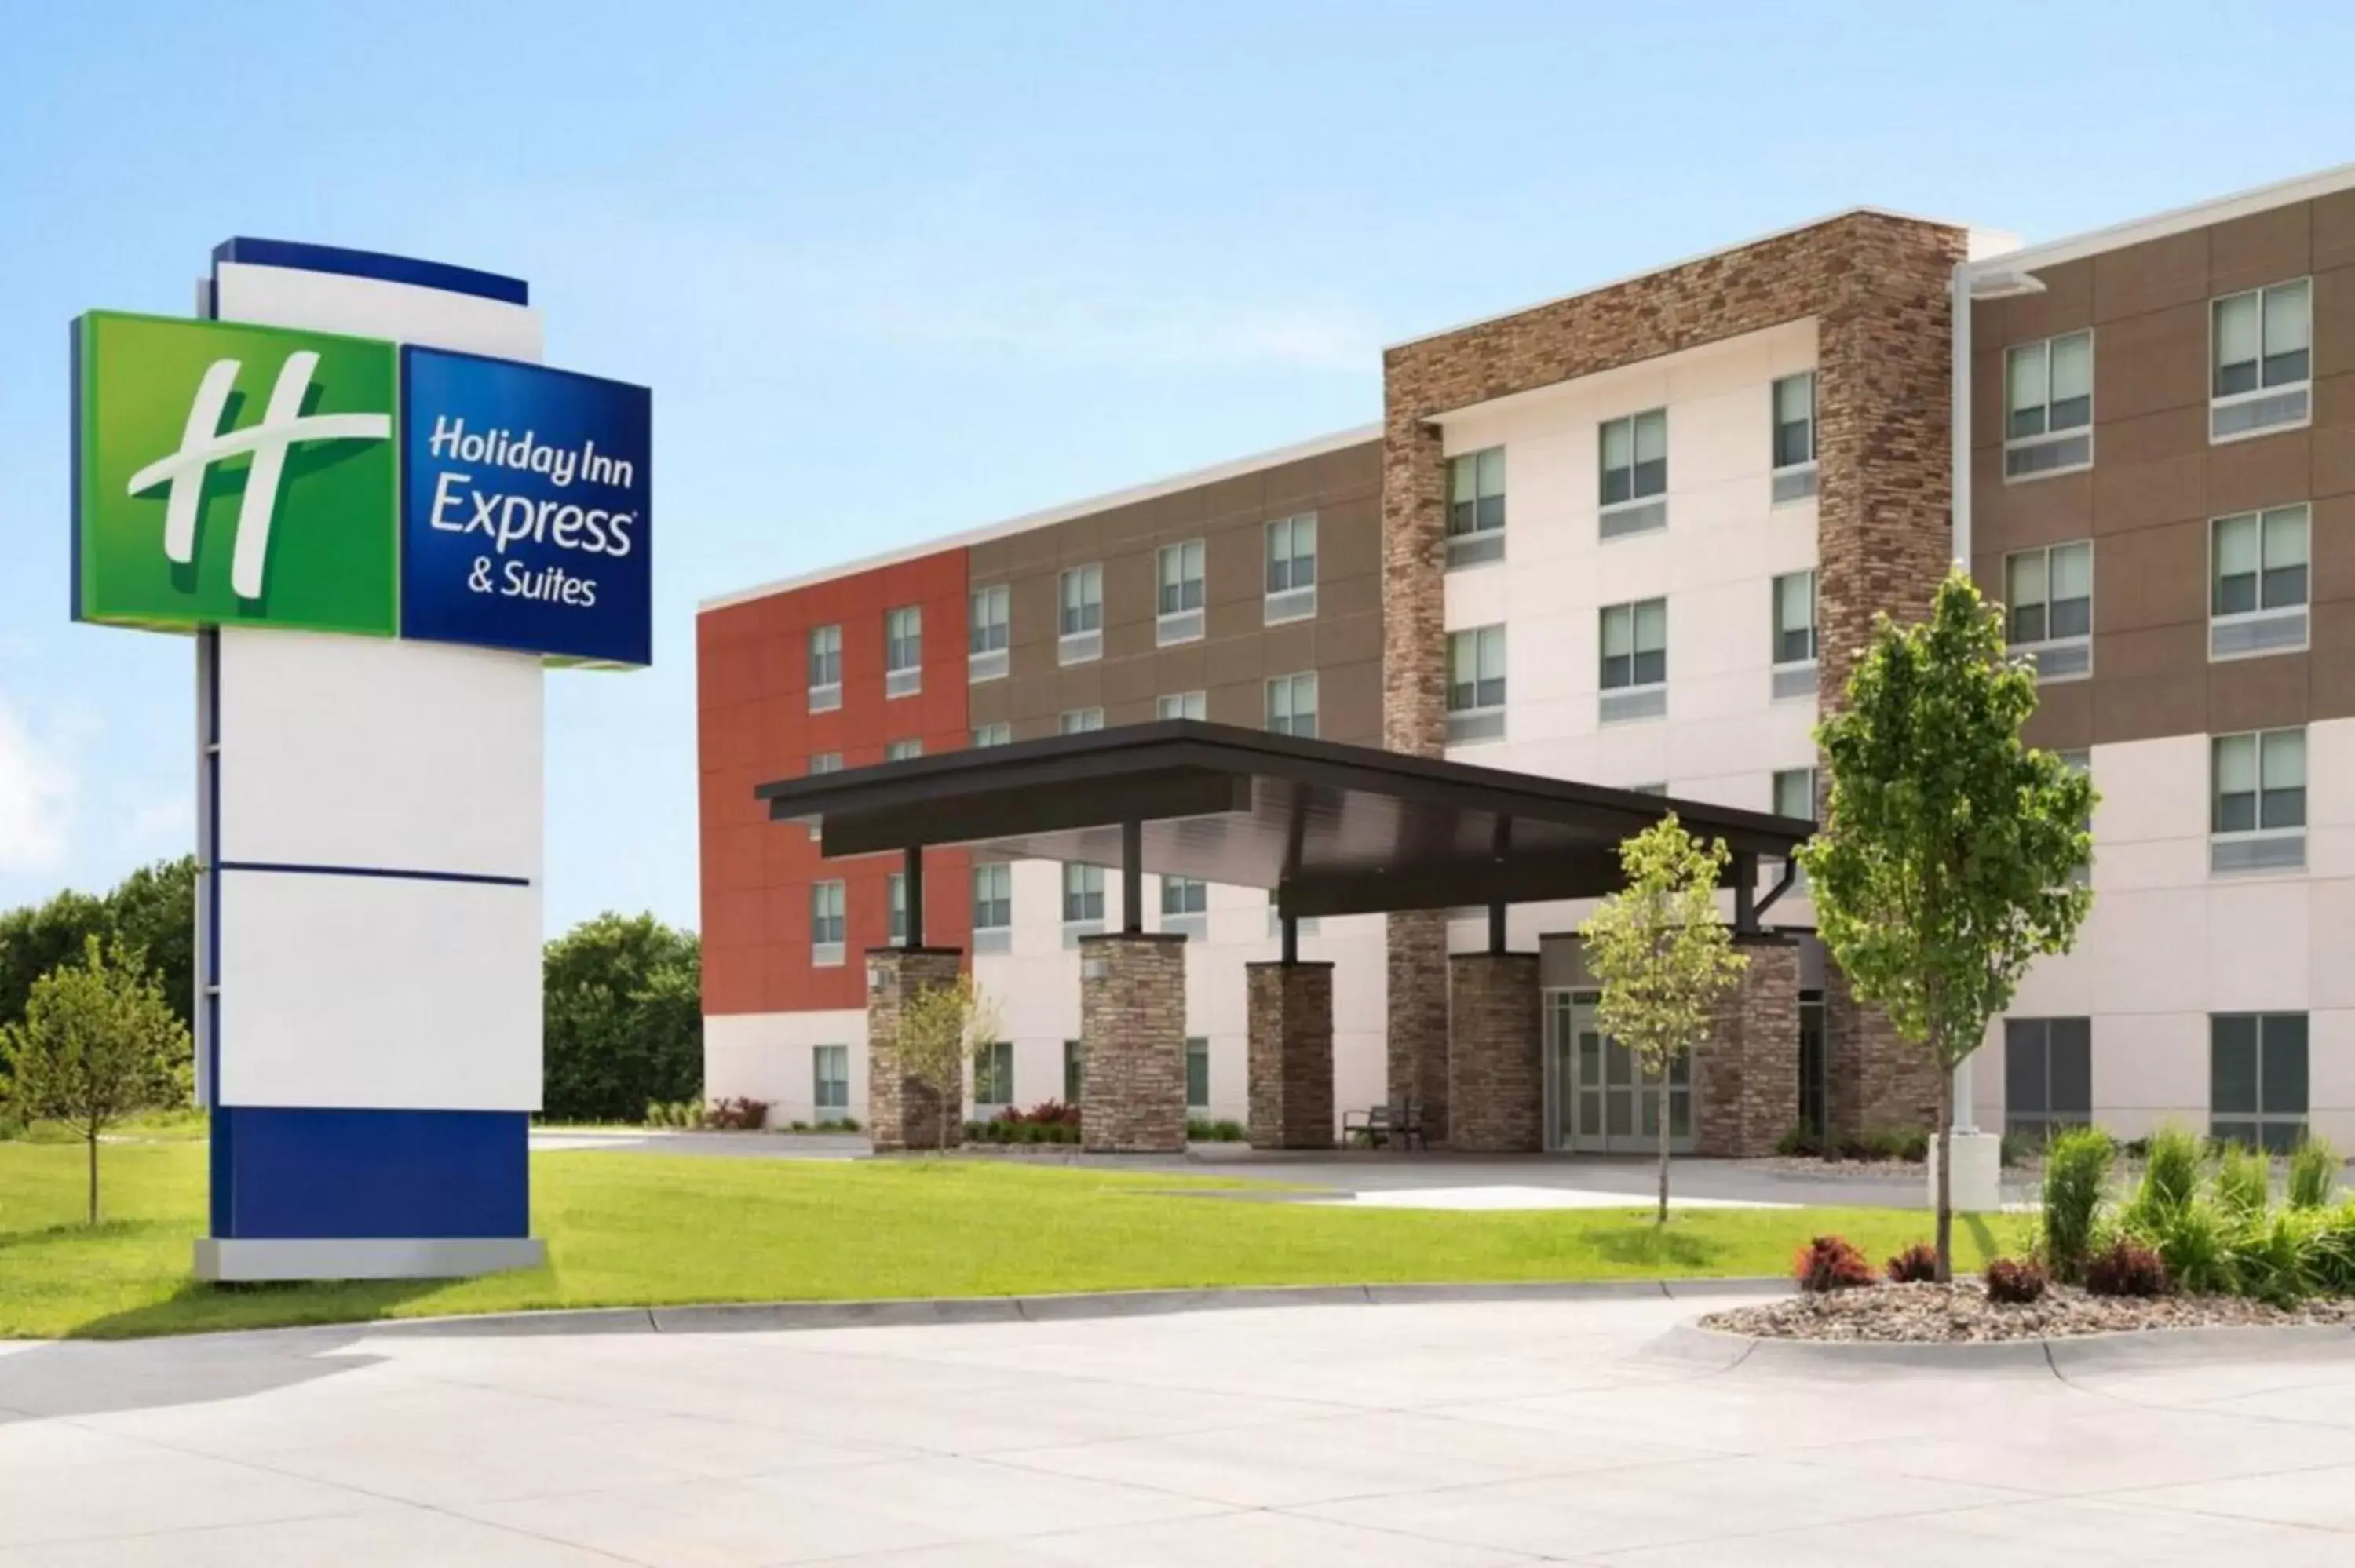 Property building in Holiday Inn Express & Suites - Gilbert - Mesa Gateway Airport